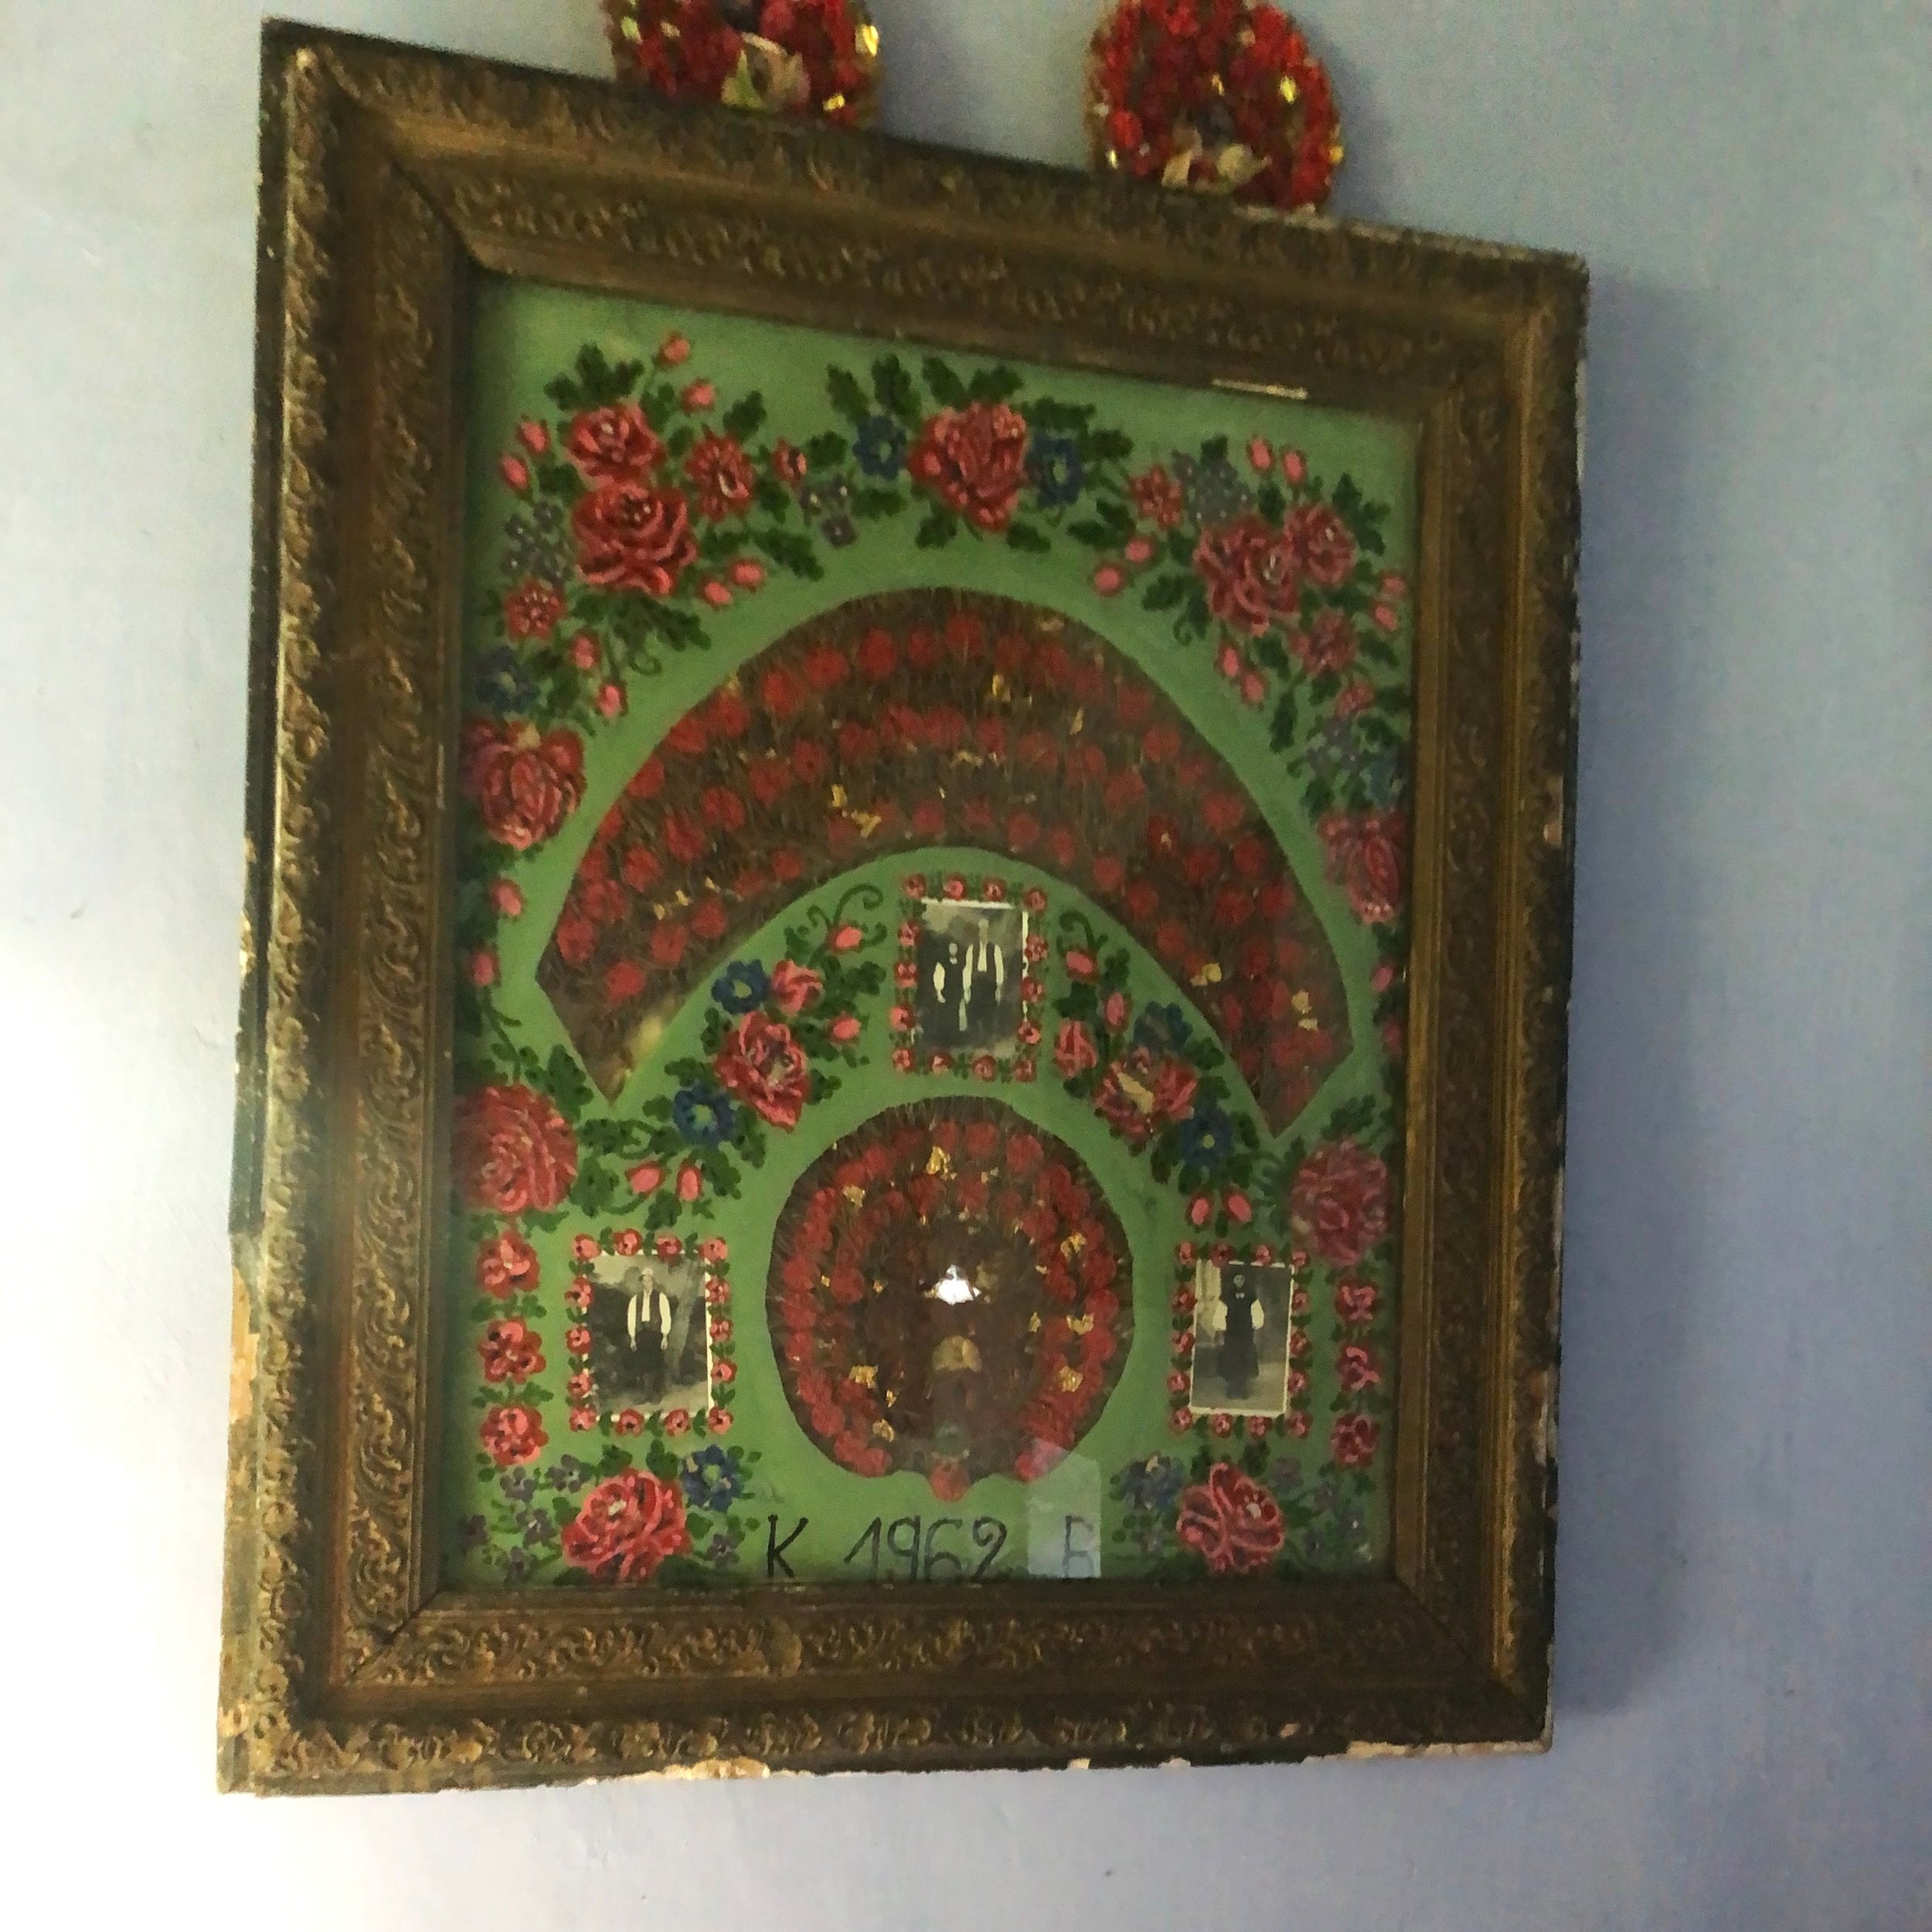  This piece, made by Zsuzsi’s grandmother, displays the traditional Széki wedding headdress, which was made out of rosemary, along with wedding photos.  